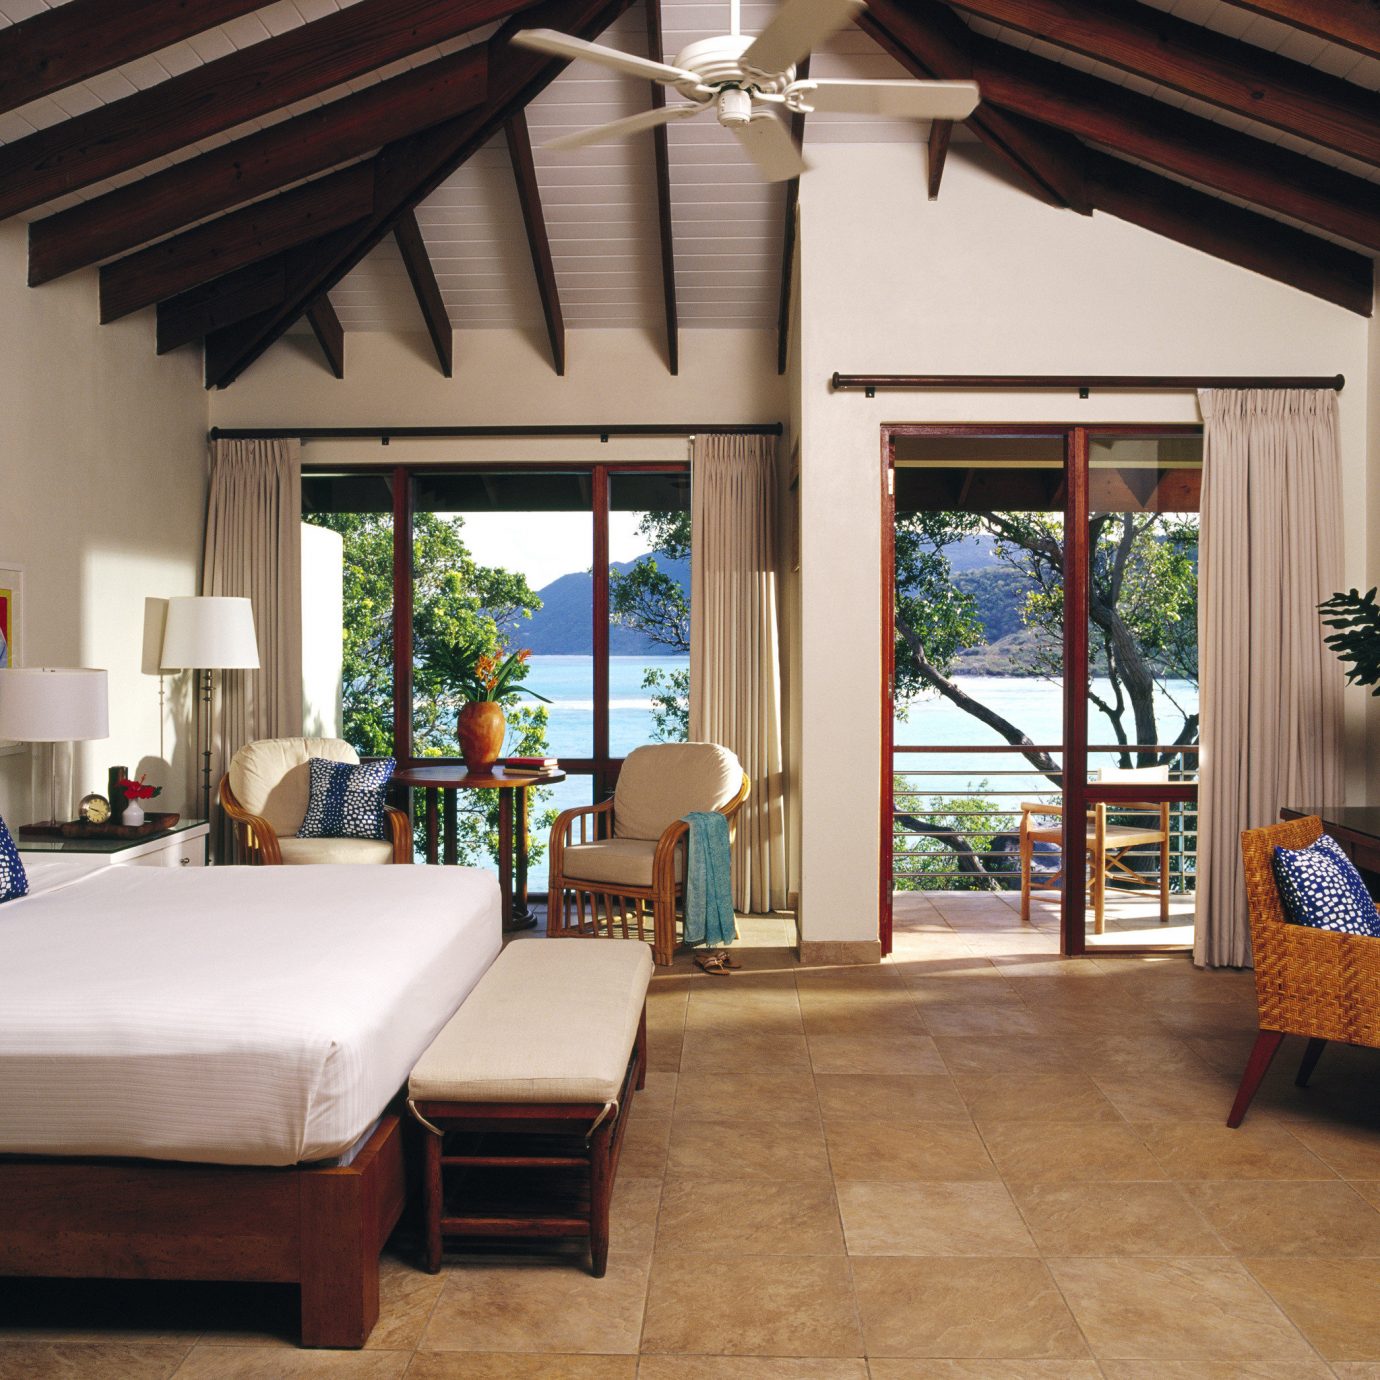 Balcony Beachfront Bedroom Elegant Island Resort Romantic Scenic views Suite Terrace Waterfront property living room house Villa home cottage porch farmhouse outdoor structure